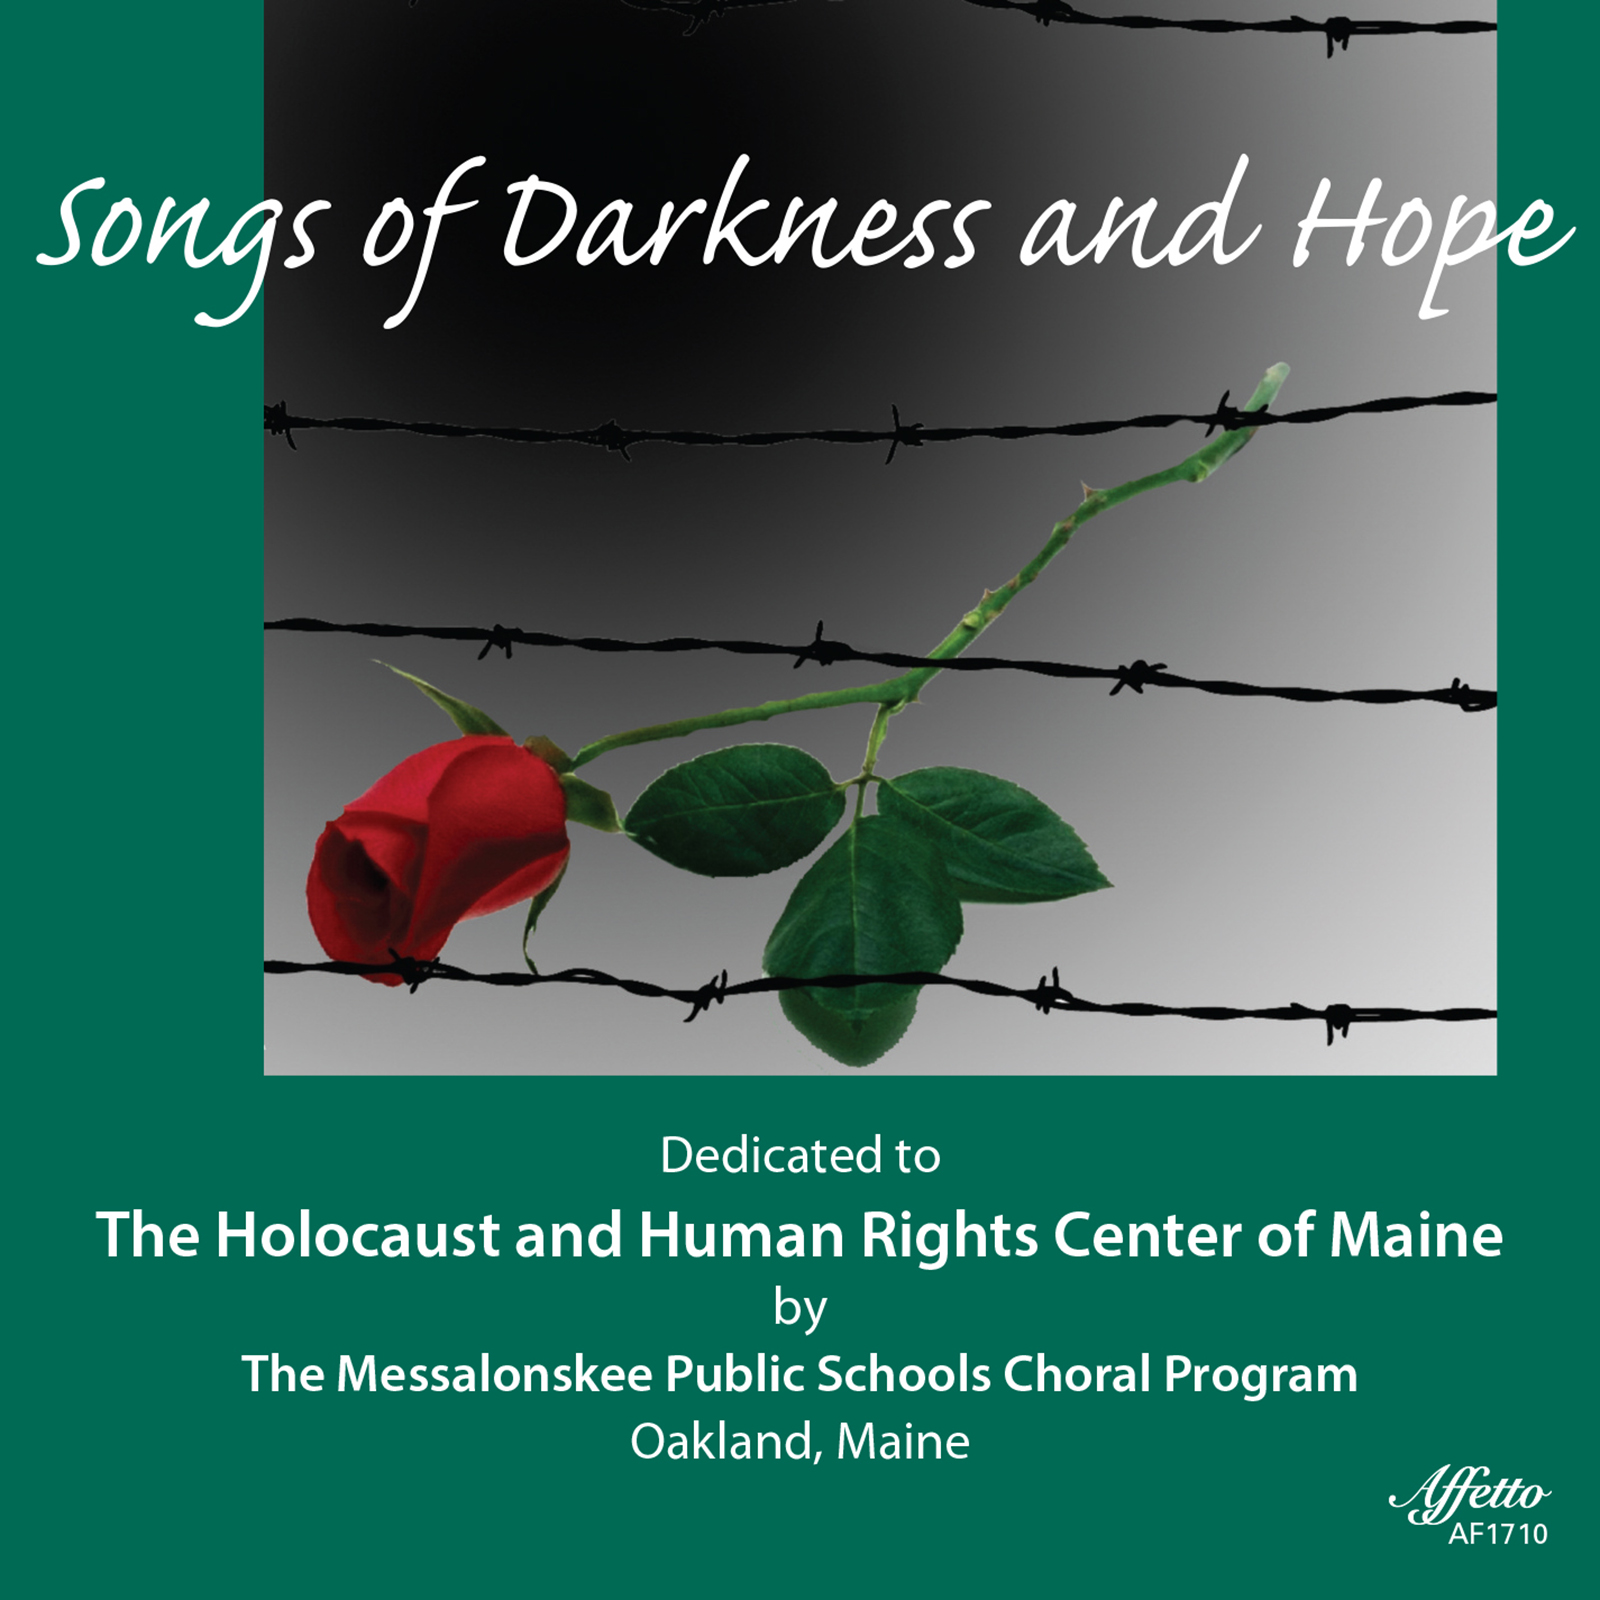 Songs of Darkness and Hope by The Messalonskee Public Schools Choral Program